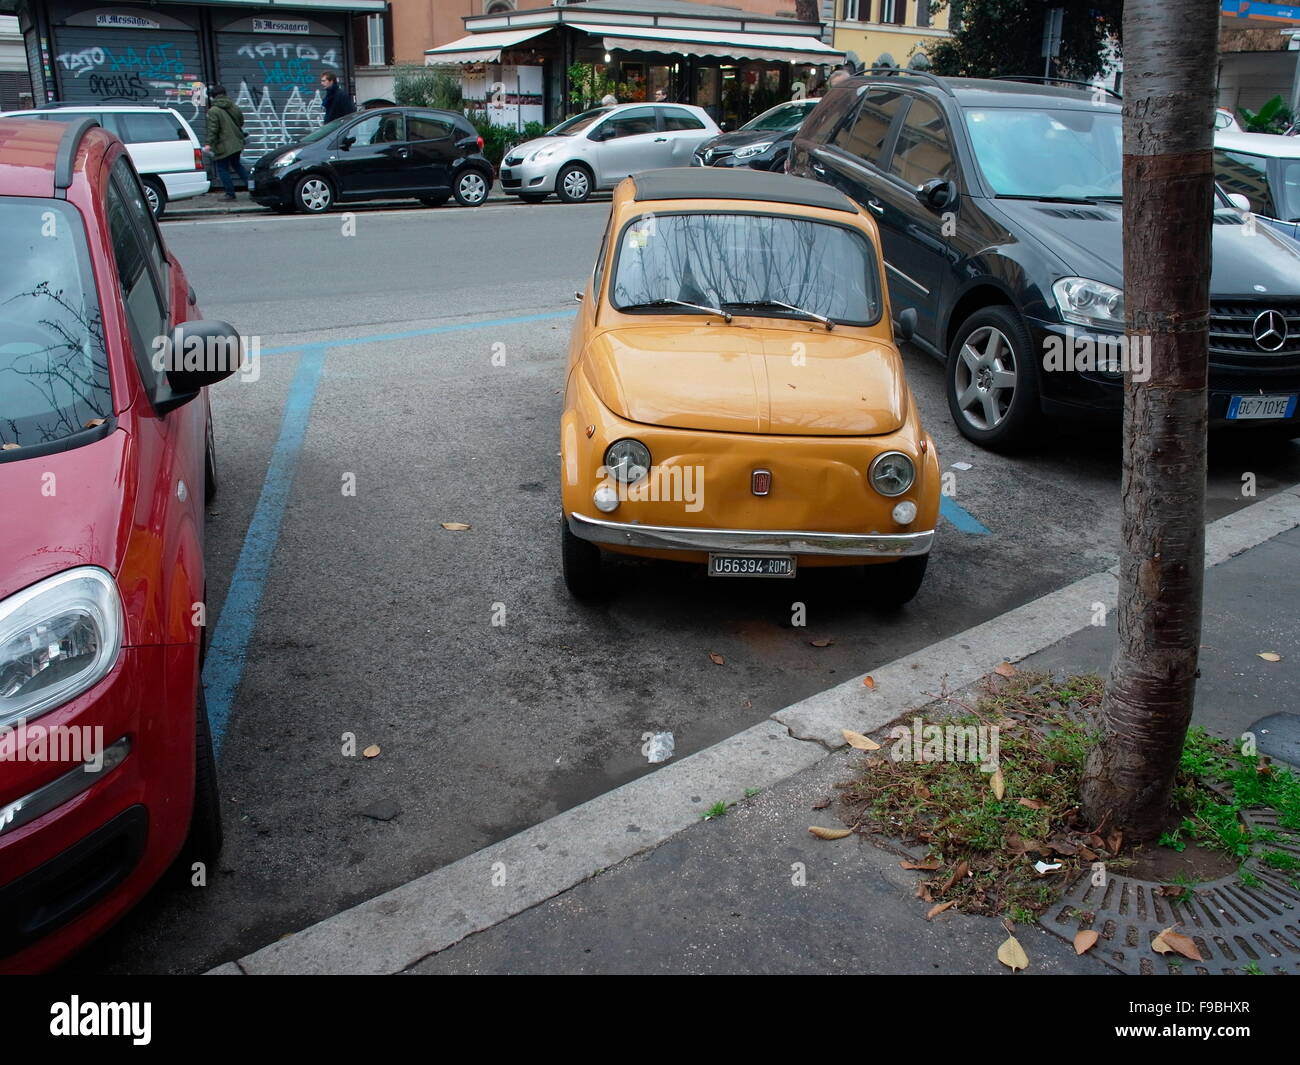 AJAXNETPHOTO. 2015. ROME, ITALY. - FIAT 500 CINQUECENTO - DANTE GIACOSA'S ORIGINAL 1957-1975 CITY CAR SALOON MODEL PARKED IN THE CITY. FIAT MADE MORE THAN 3MILLION OF THESE VEHICLES BEFORE PRODUCTION ENDED. PHOTO:JONATHAN EASTLAND/AJAX REF:GX151012_758884 Stock Photo